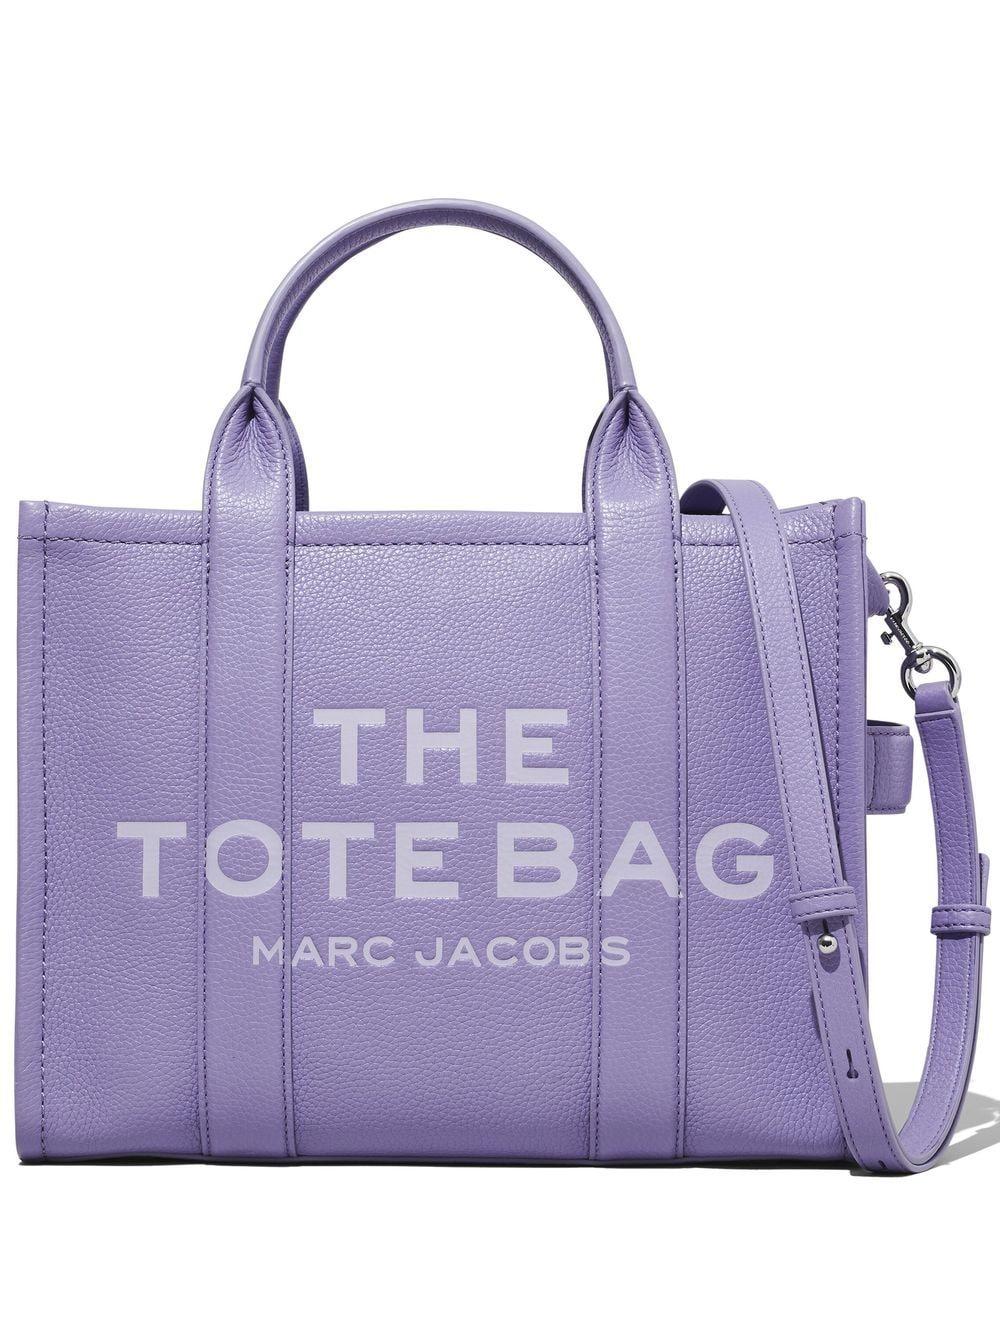 Marc Jacobs The Tote Large Leather Bag in Purple | Lyst Australia